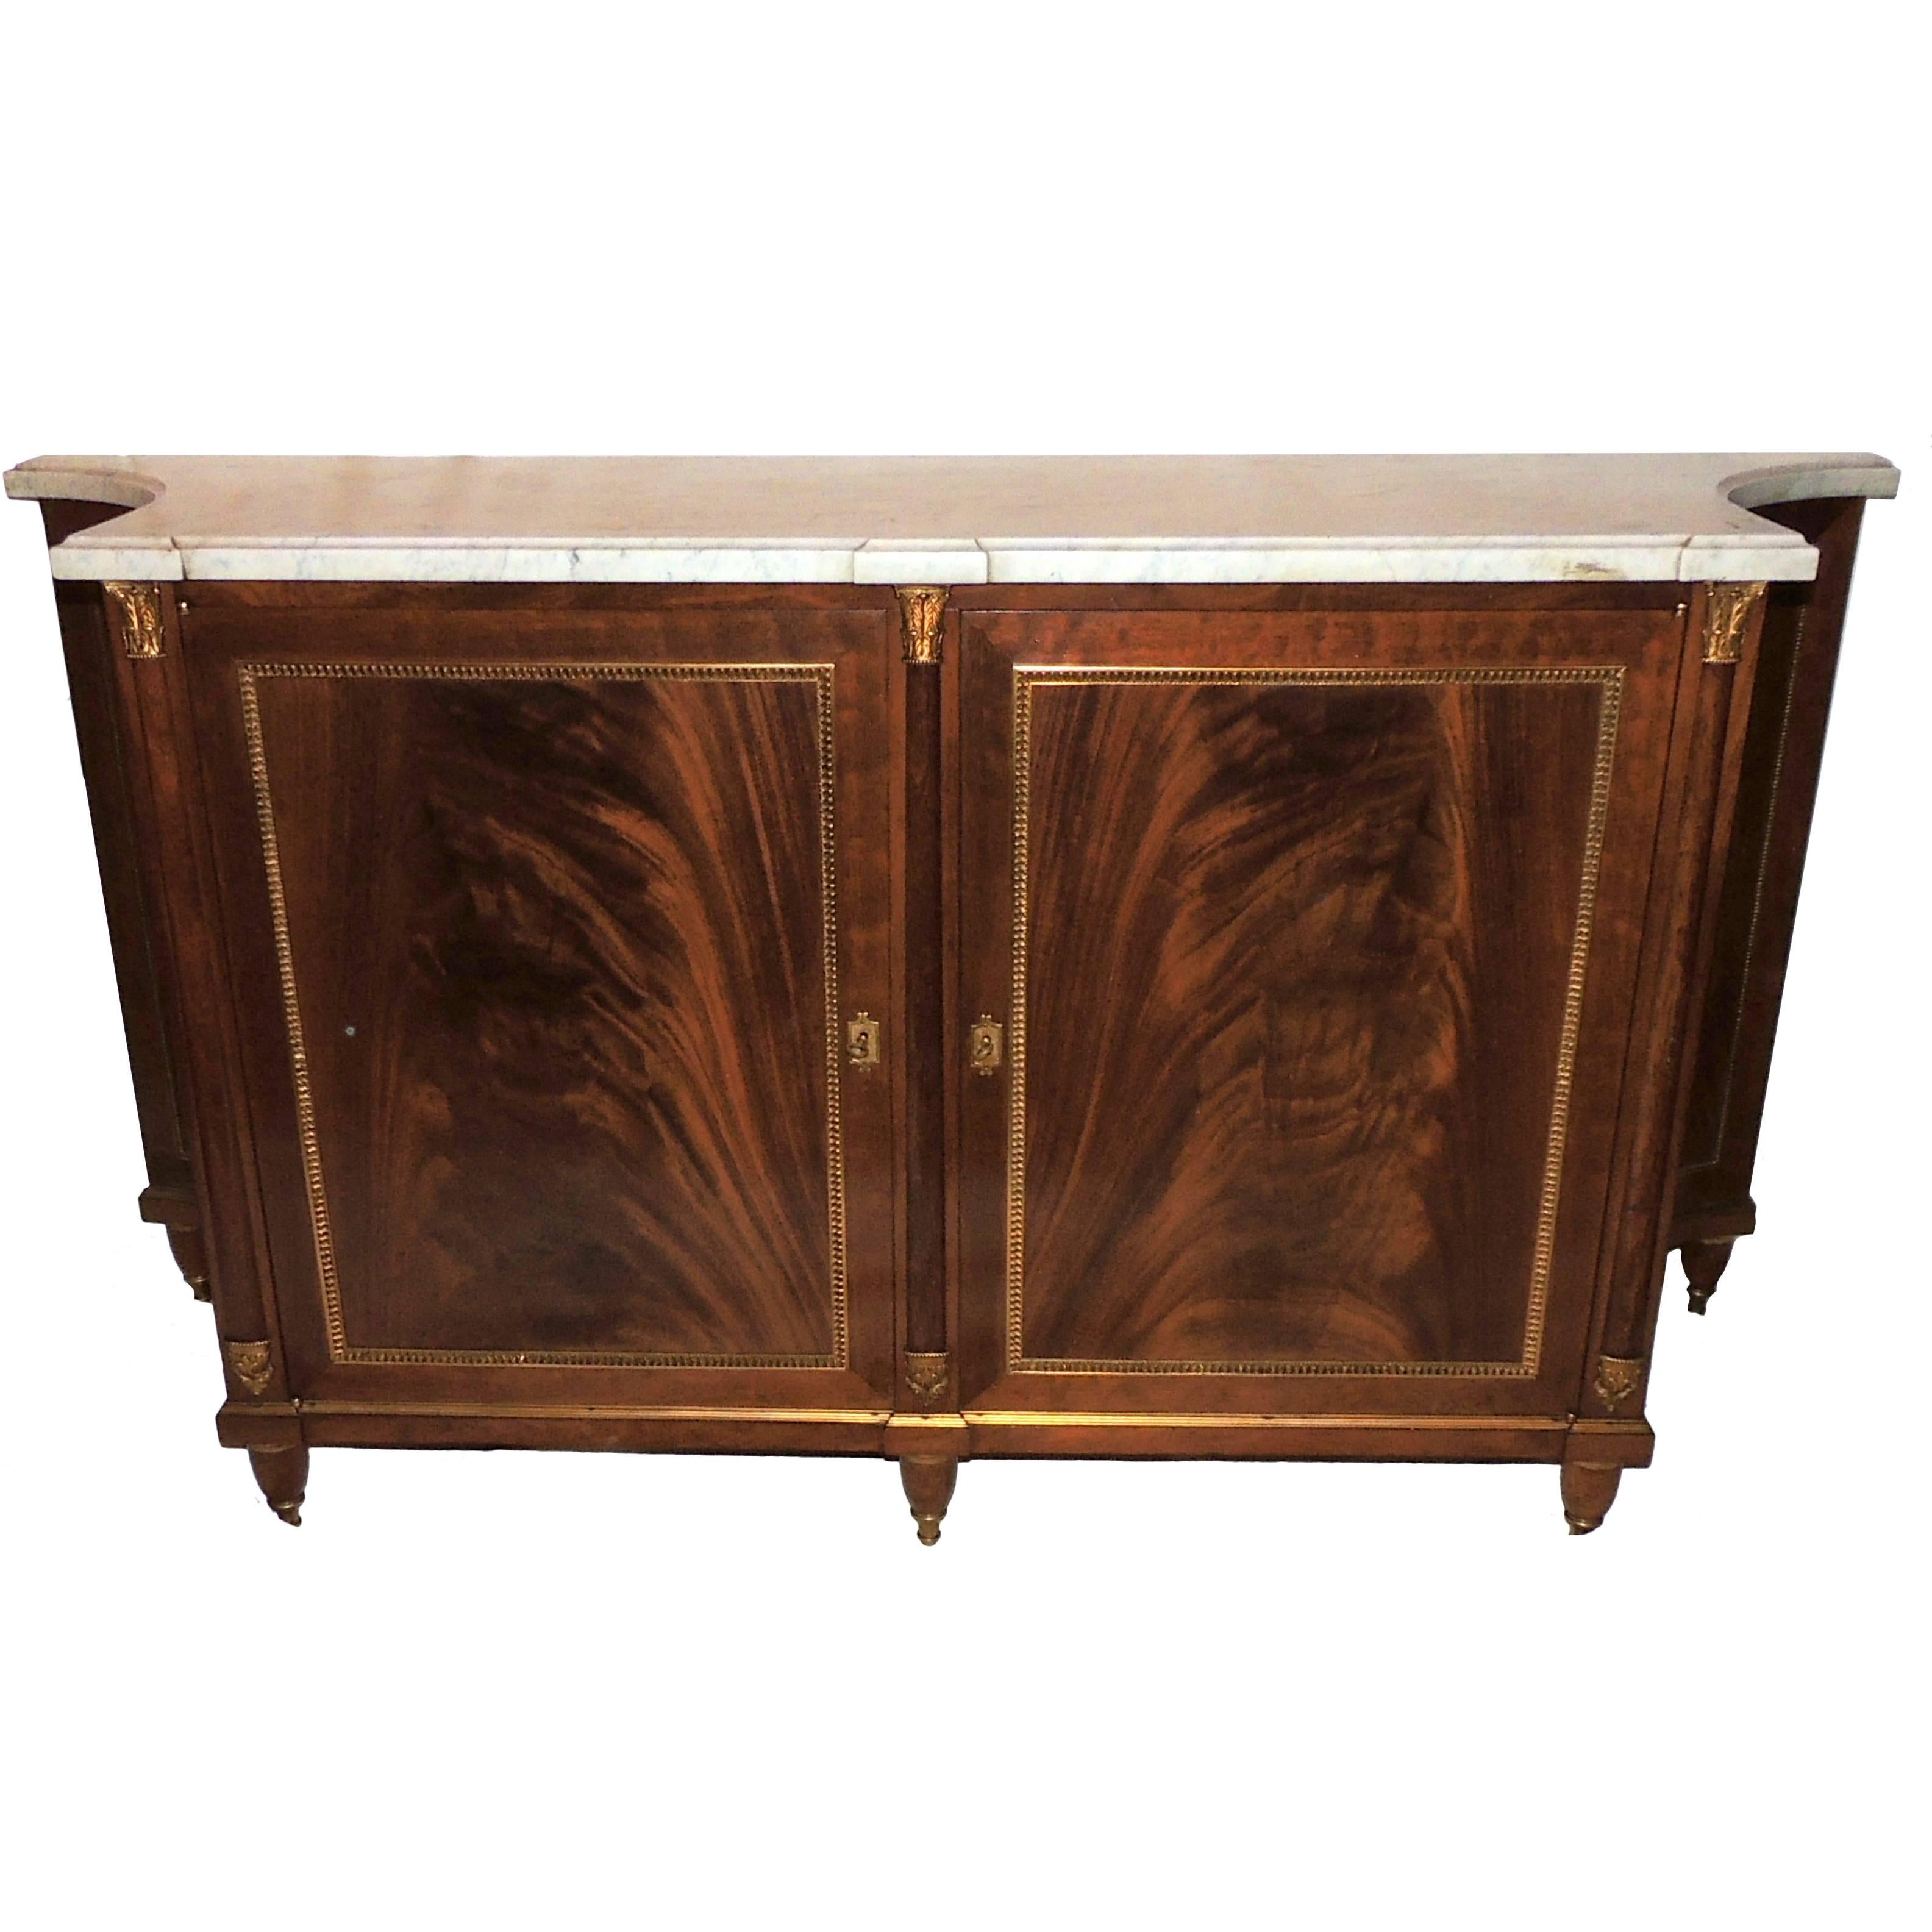 Wonderful French Maison Jansen Ormolu Bronze Marble Top Commode Chest Console